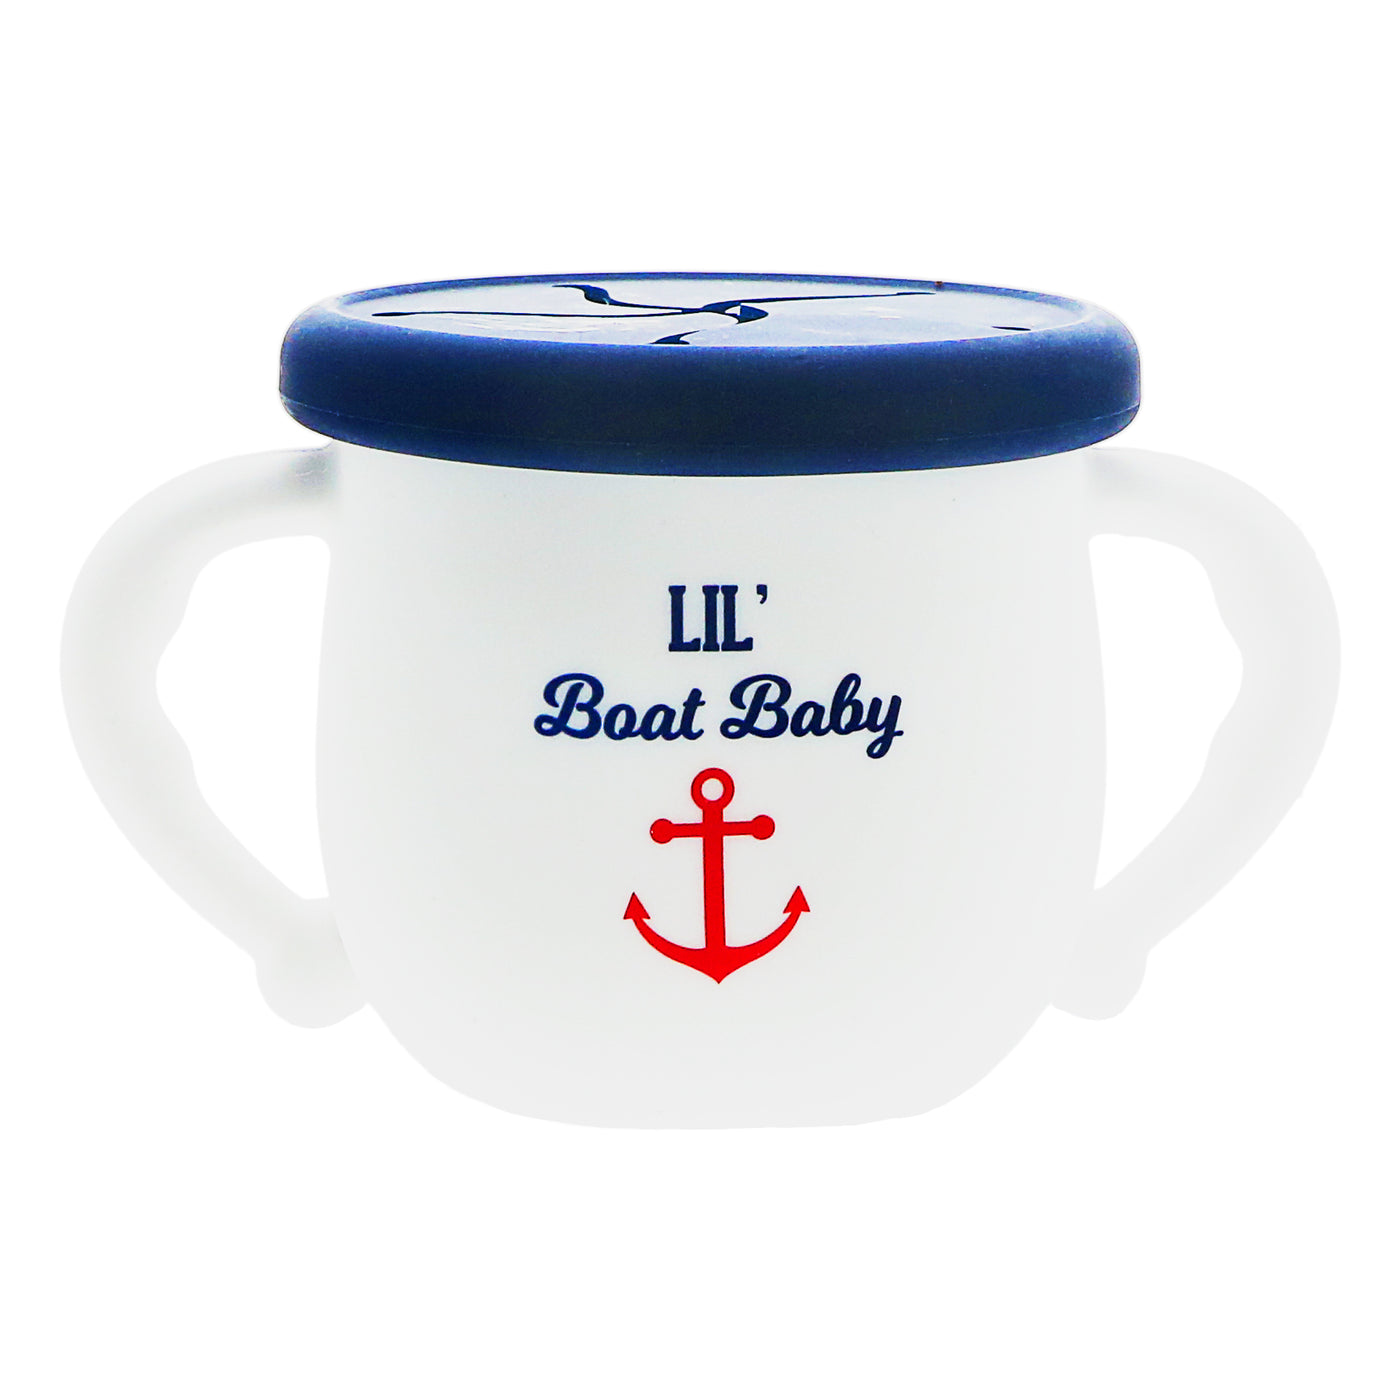 Boat Baby Silicone Snack Bowl with Lid